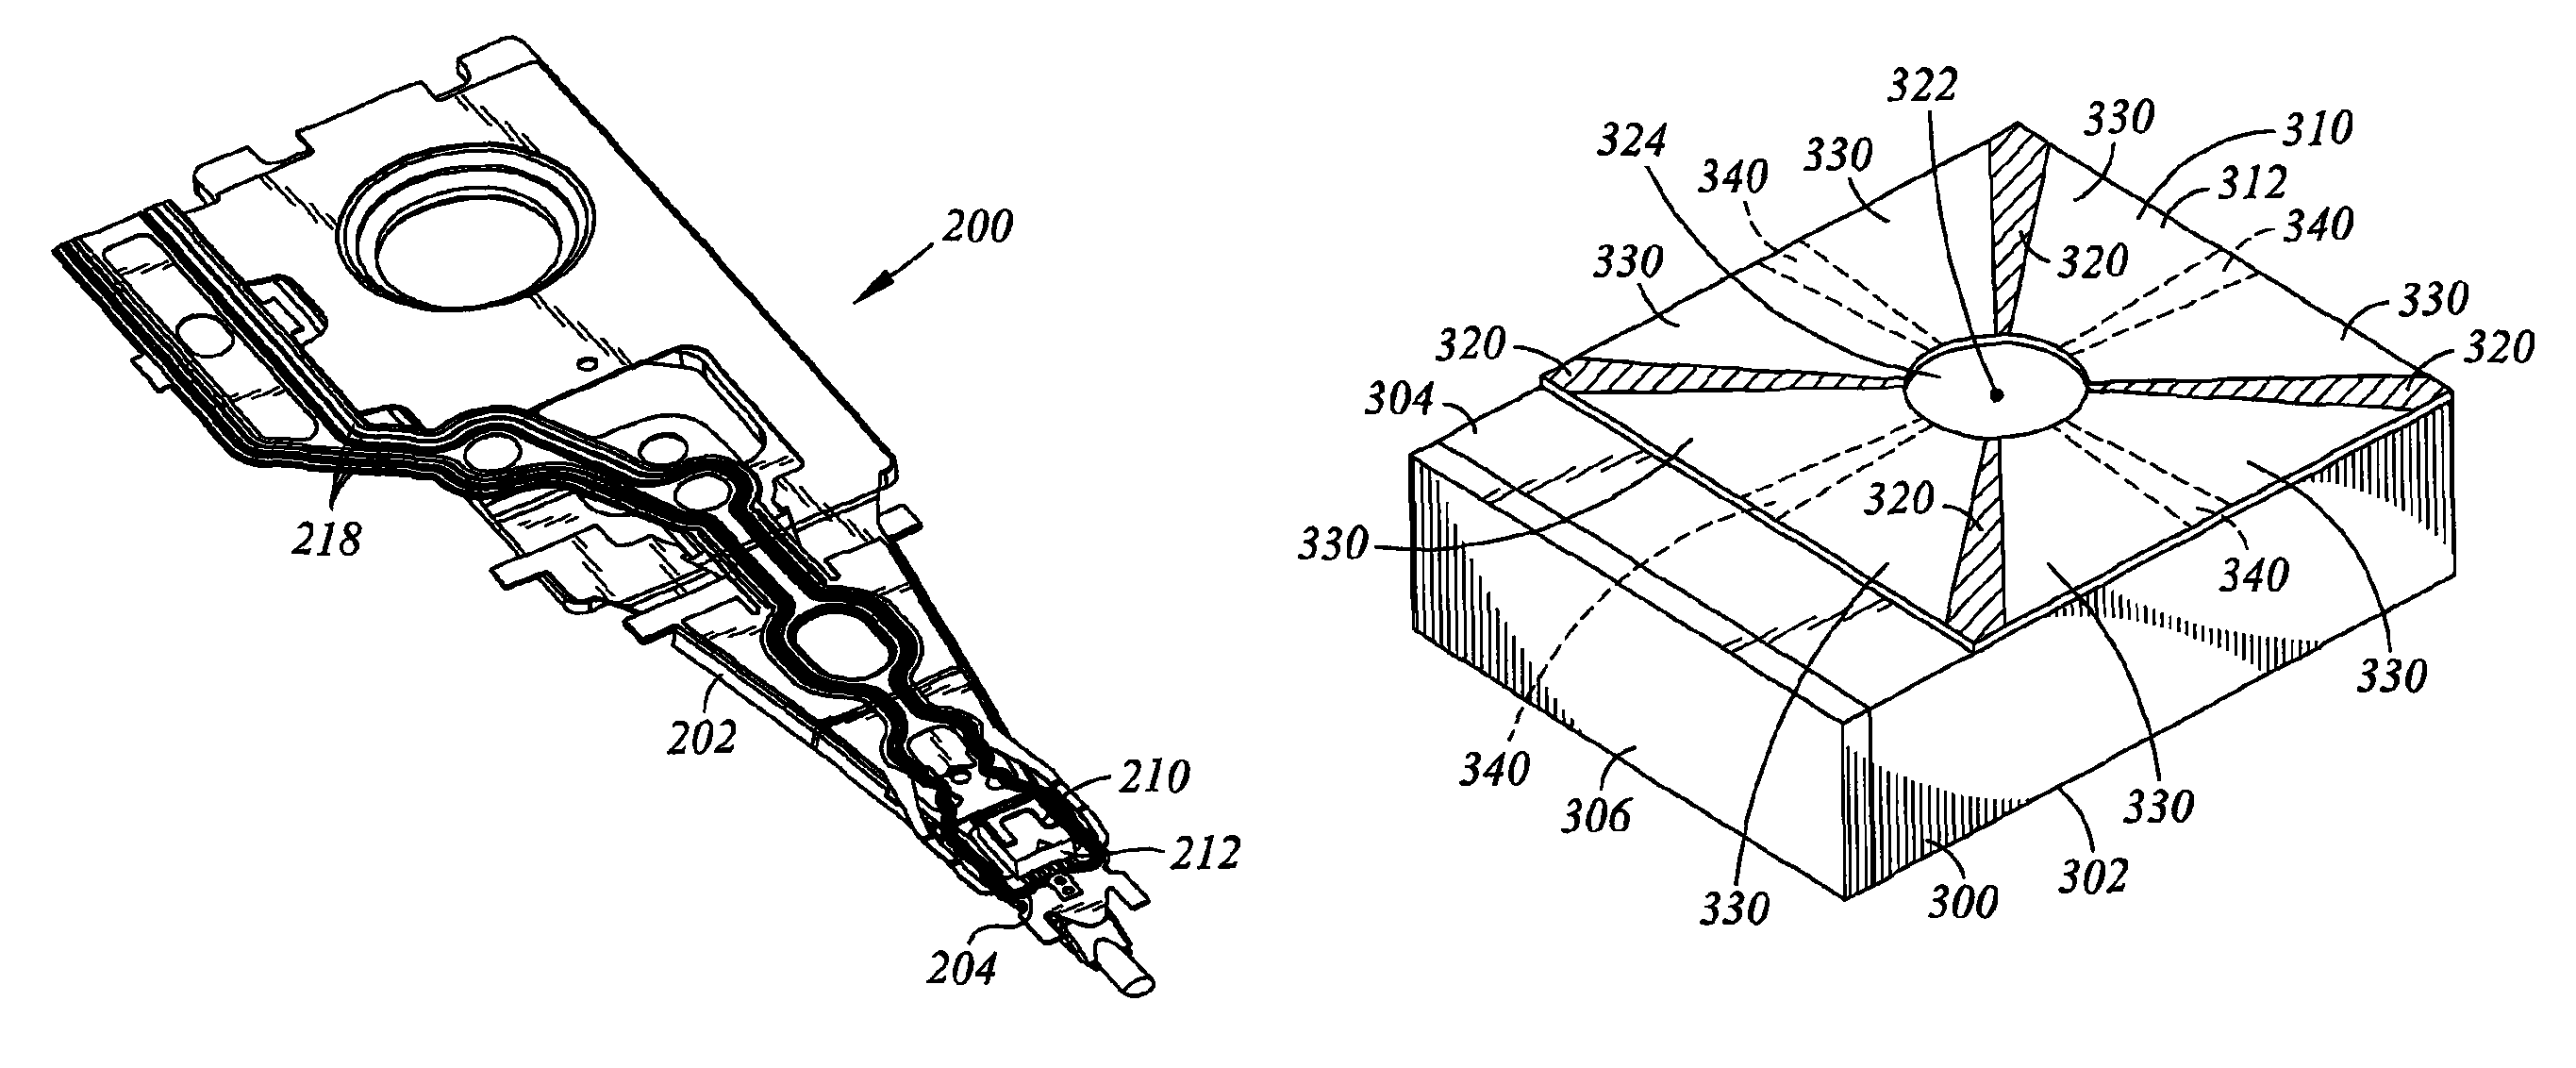 Head gimbal assembly having a radial rotary piezoelectric microactuator between a read head and a flexure tongue